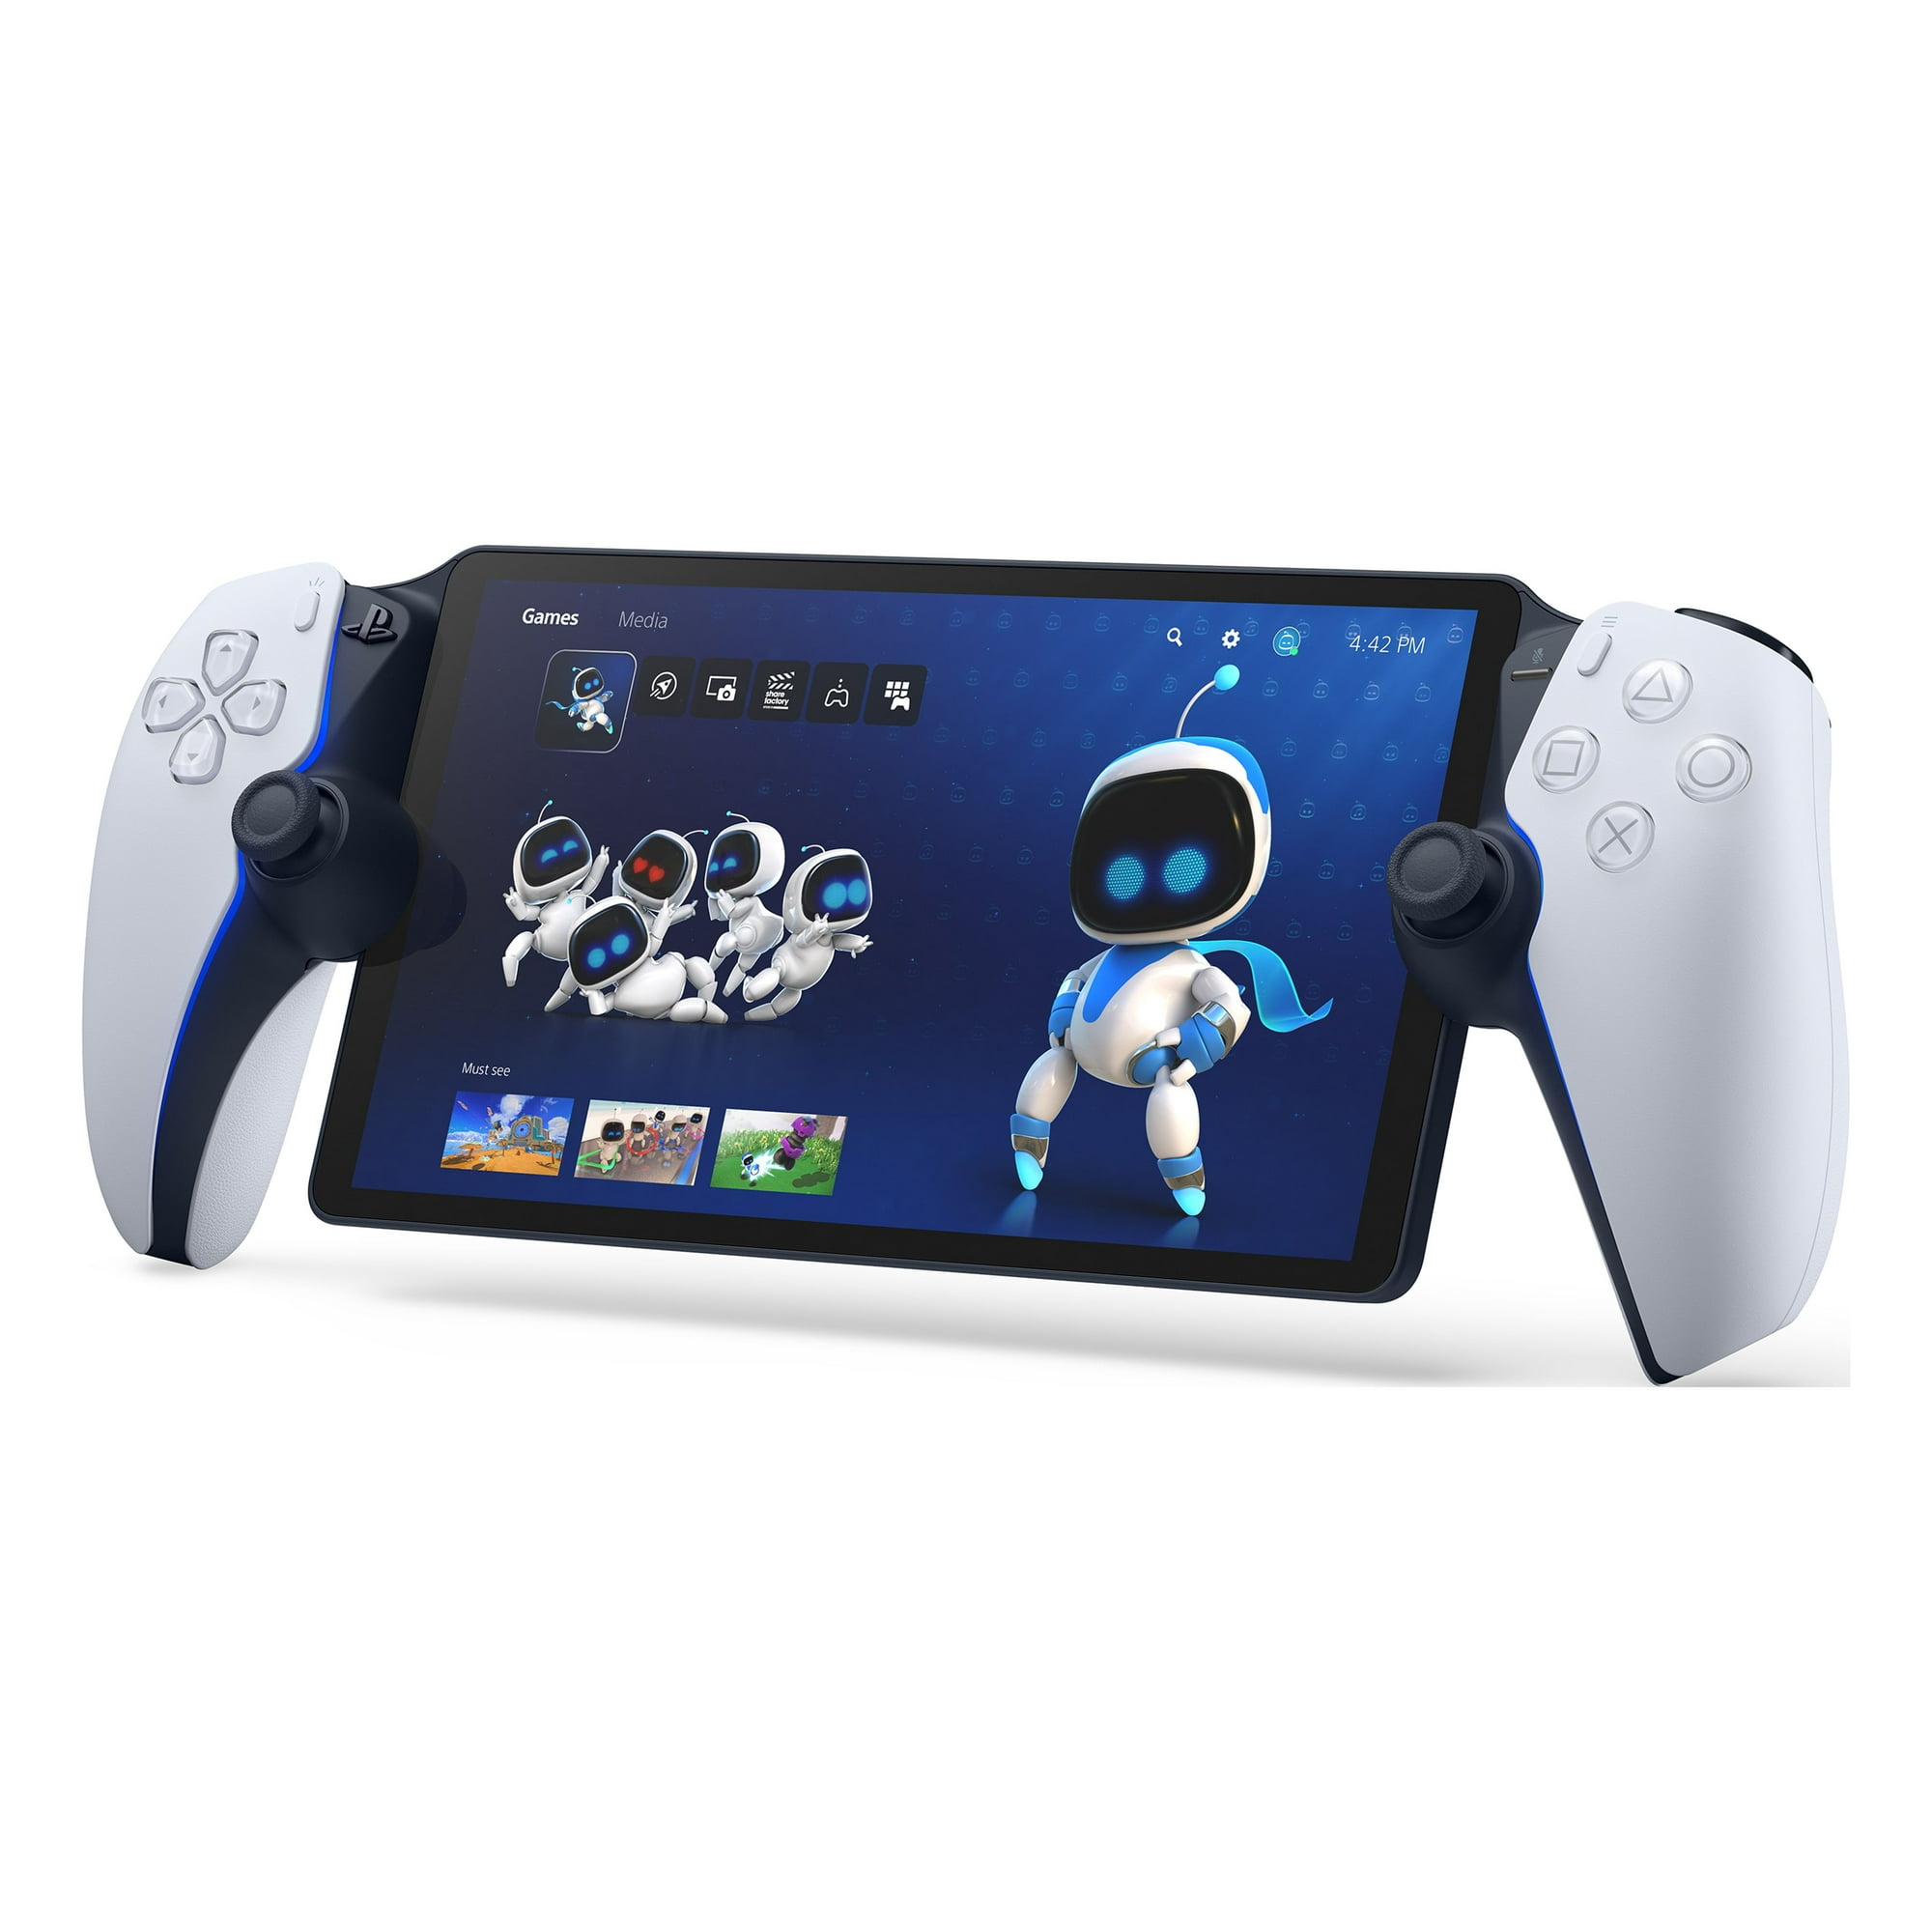 PlayStation-Portal-Remote-Player-for-PS5-Console_a0af7ae4-2bf7-4e49-a5c7-26939b3e91d0.a94bca8df04fdc68fe213ba37d9245ca.jpeg